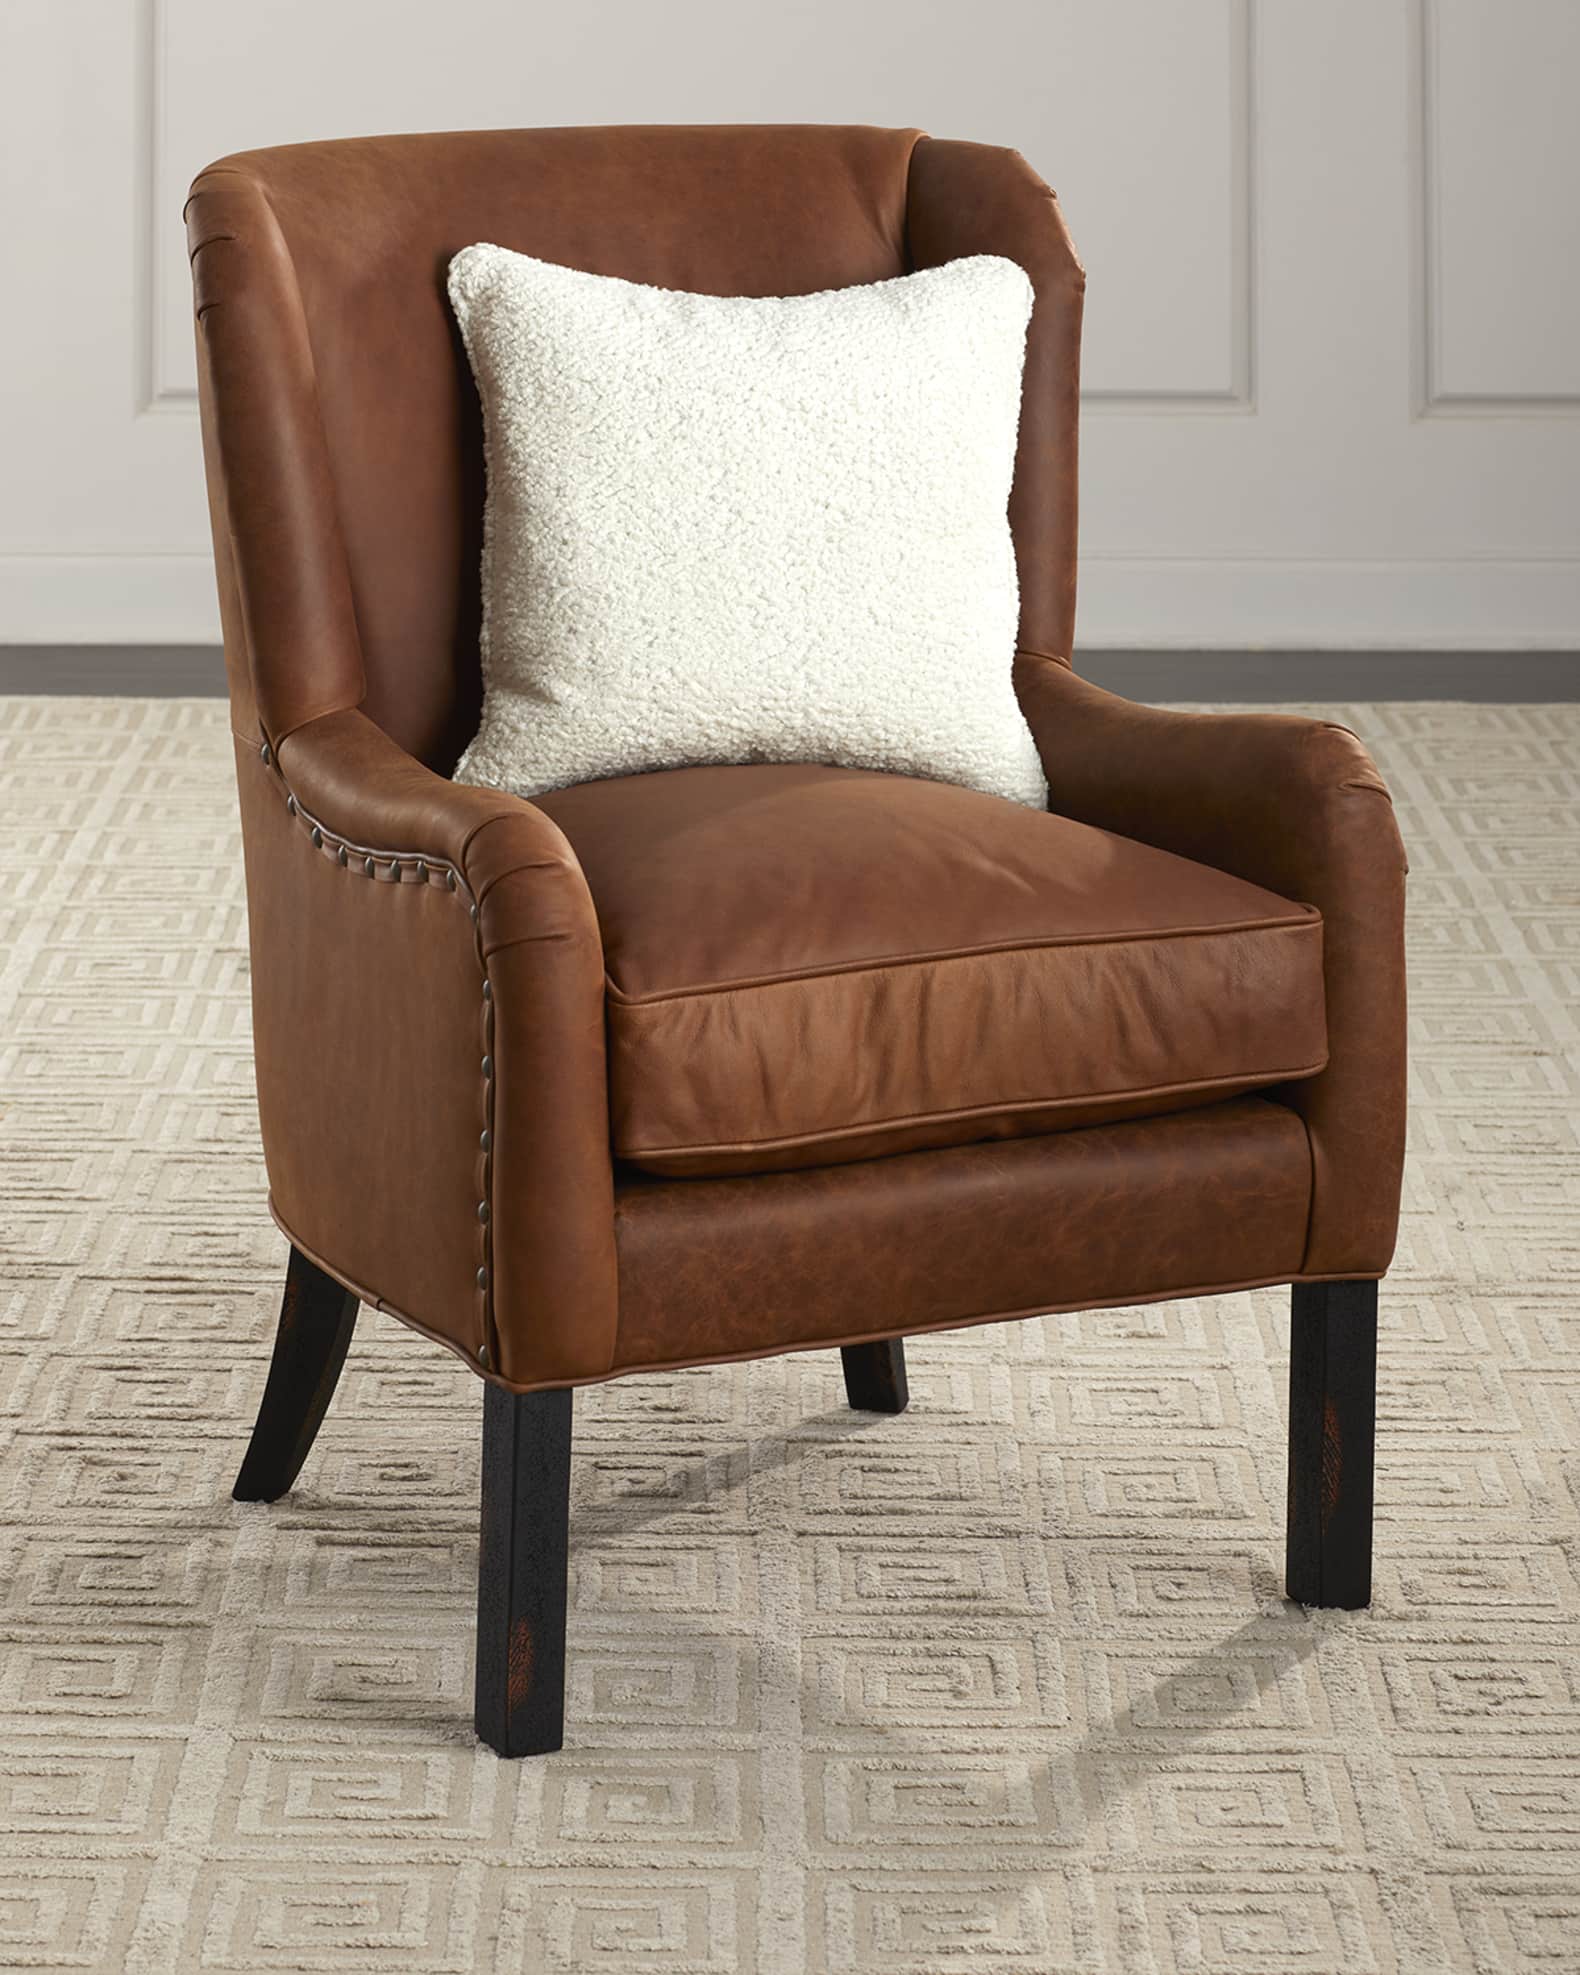 Old Hickory Tannery Benjamin Leather Wing Chair | Horchow